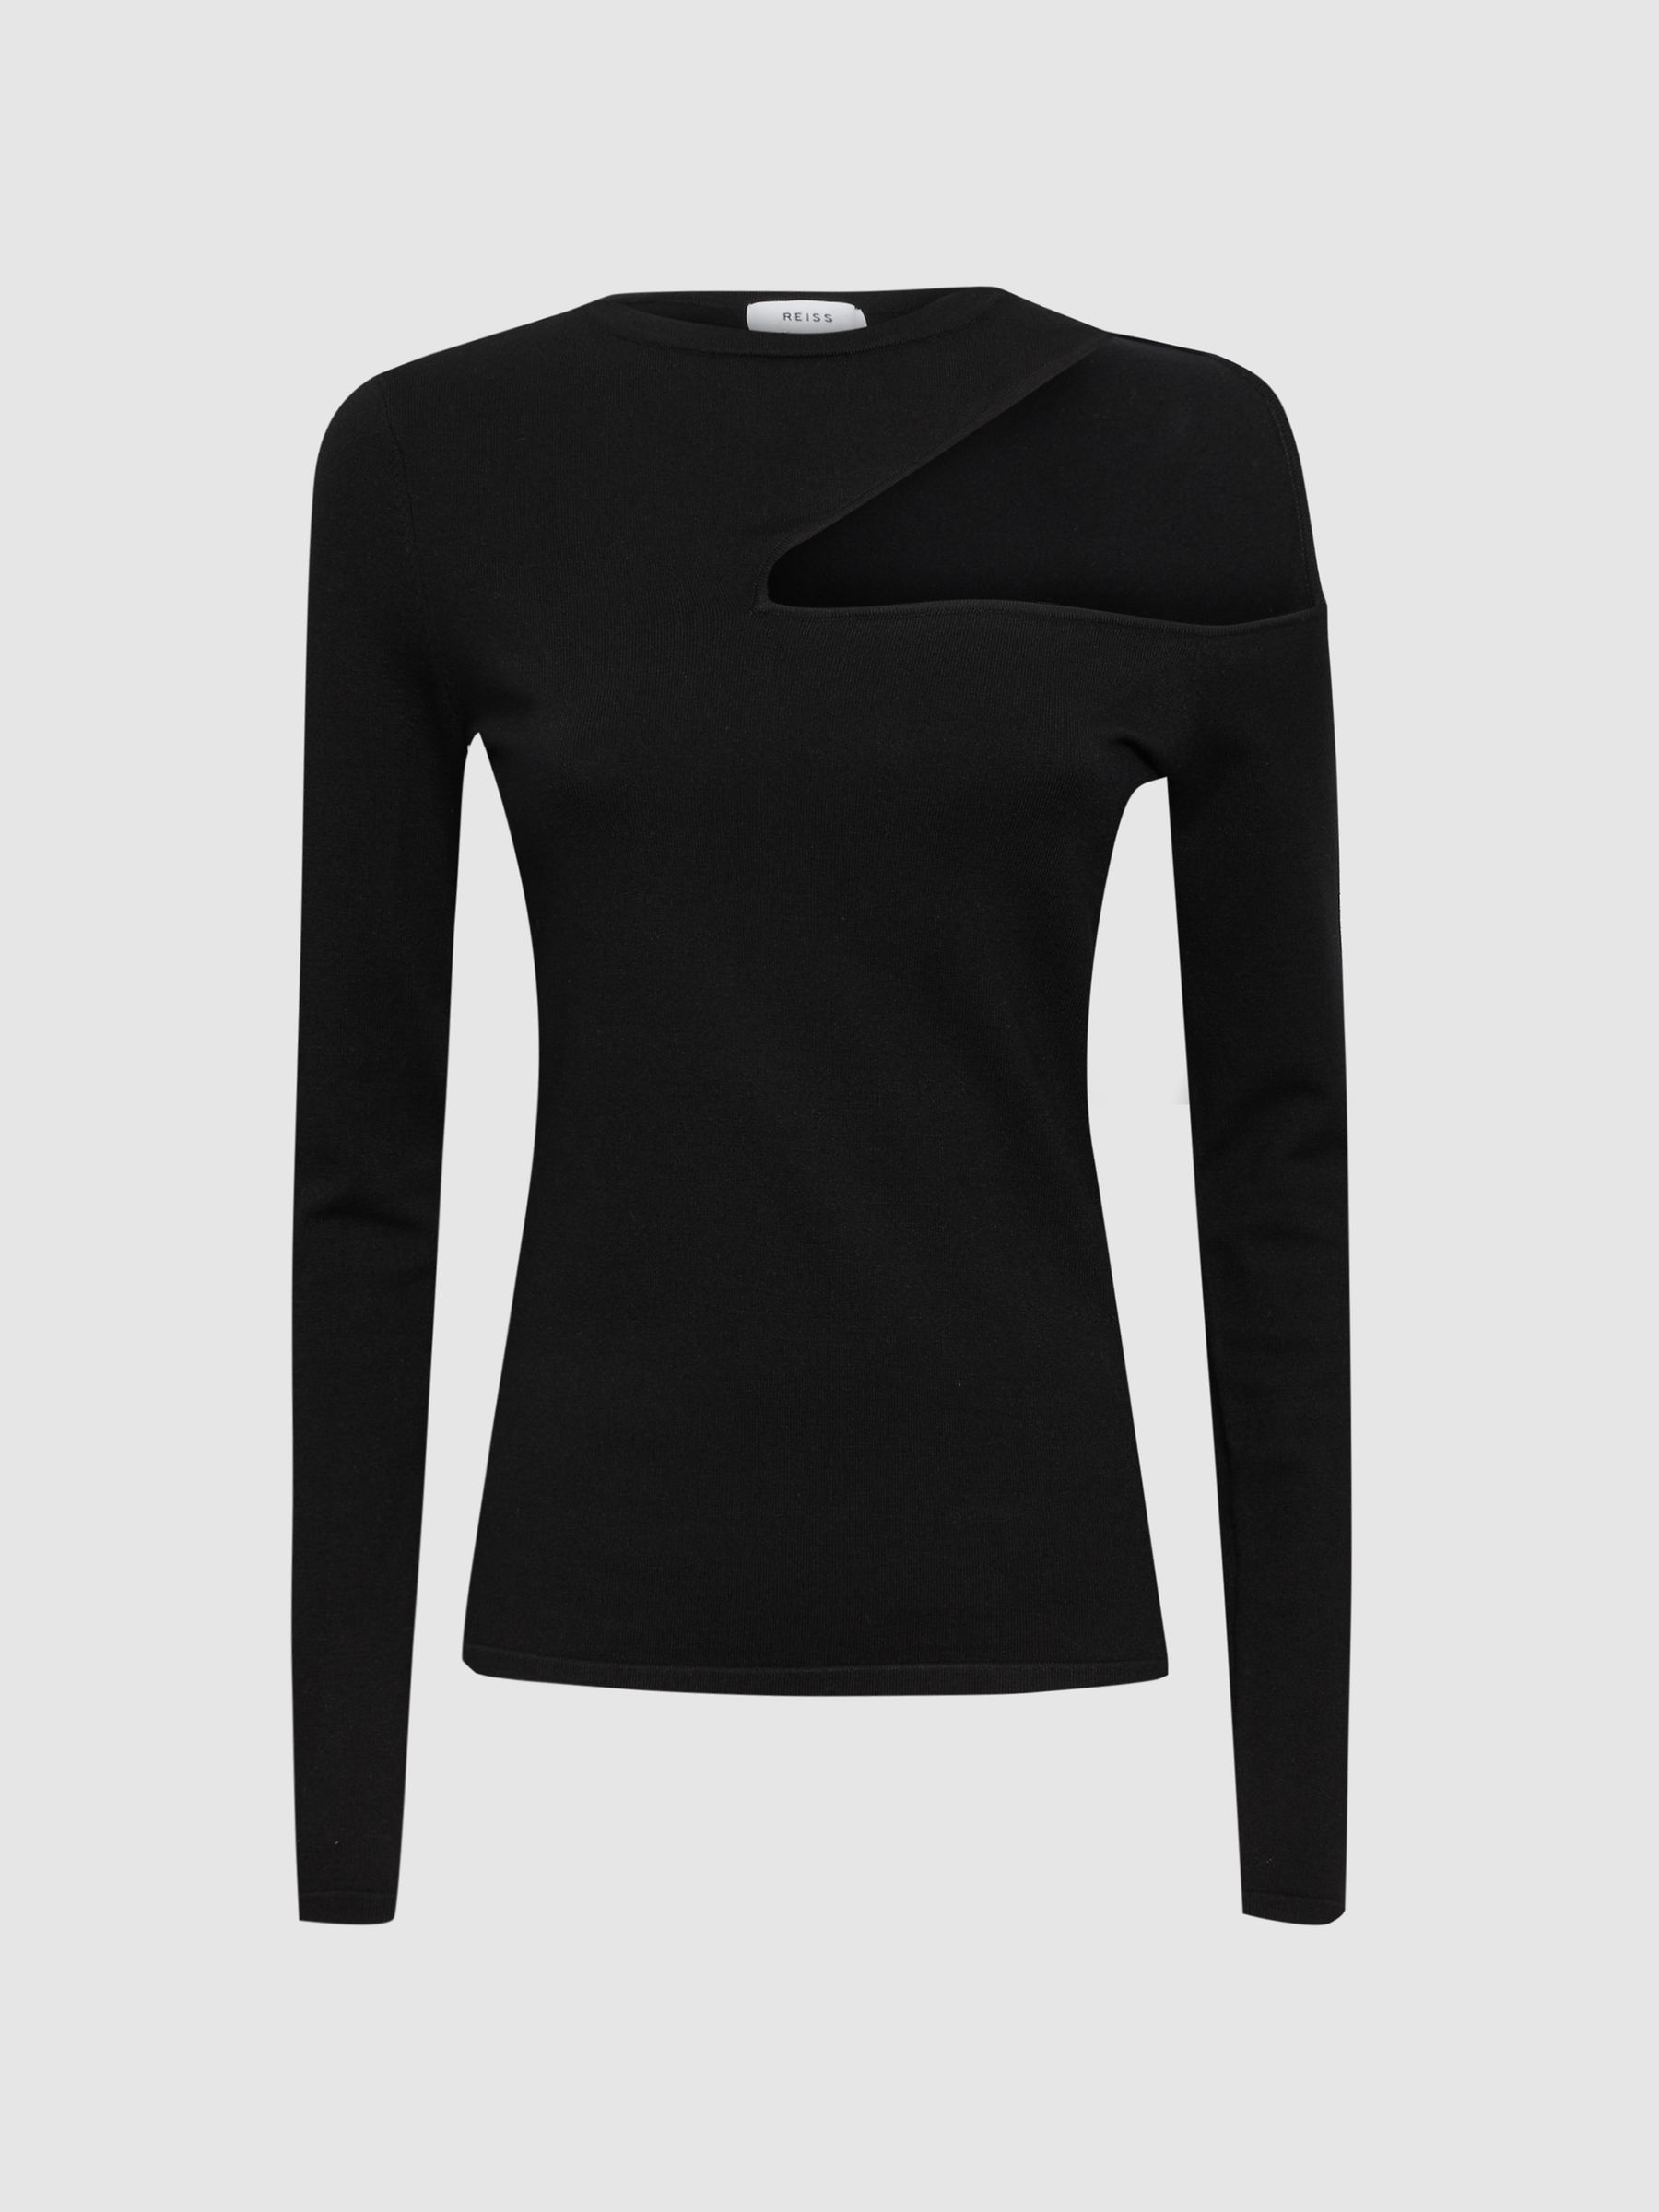 Reiss Lucille Fitted Cut-Out Long Sleeve Top - REISS